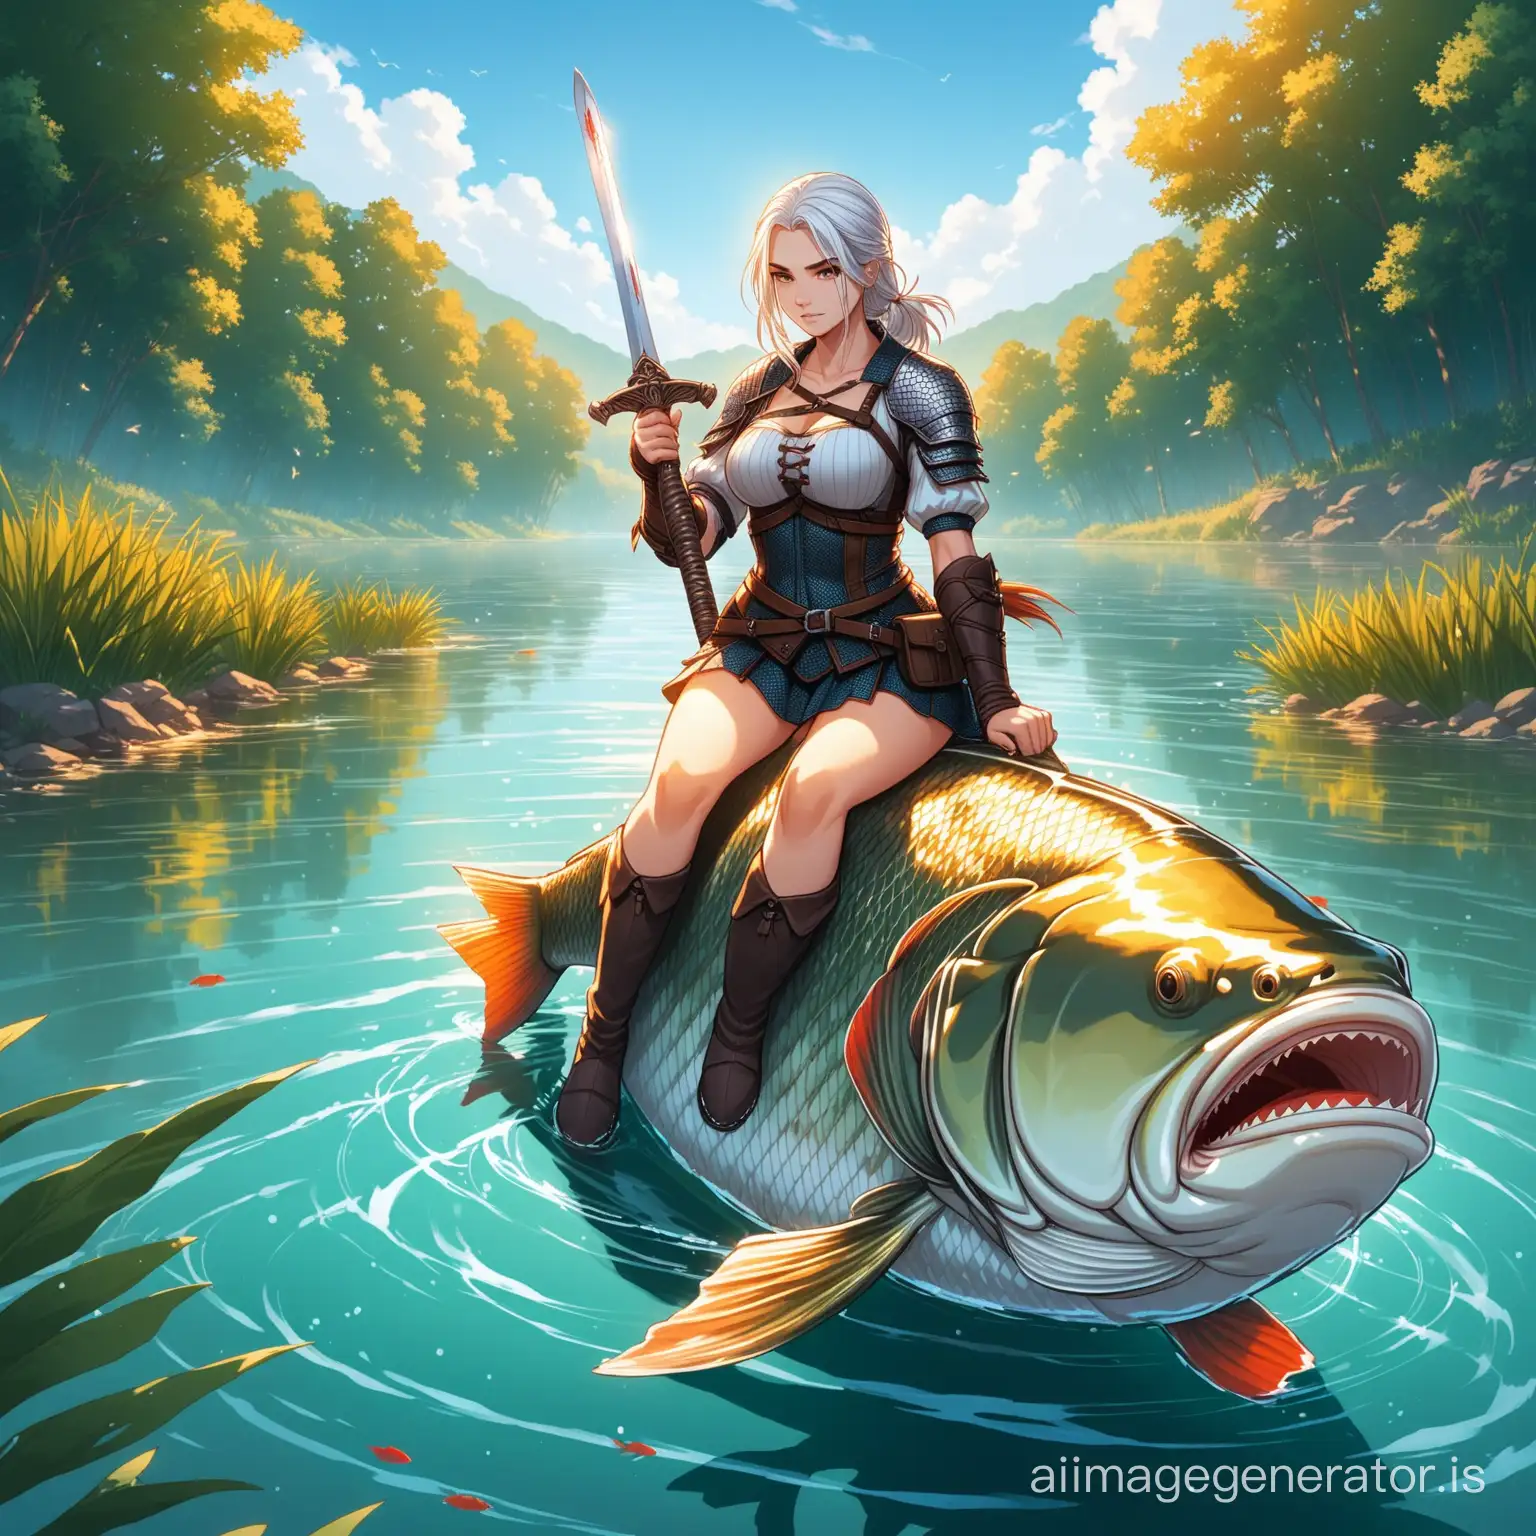 Adventurous-Geralt-Lookalike-Riding-a-Crucian-Carp-with-Sword-in-River